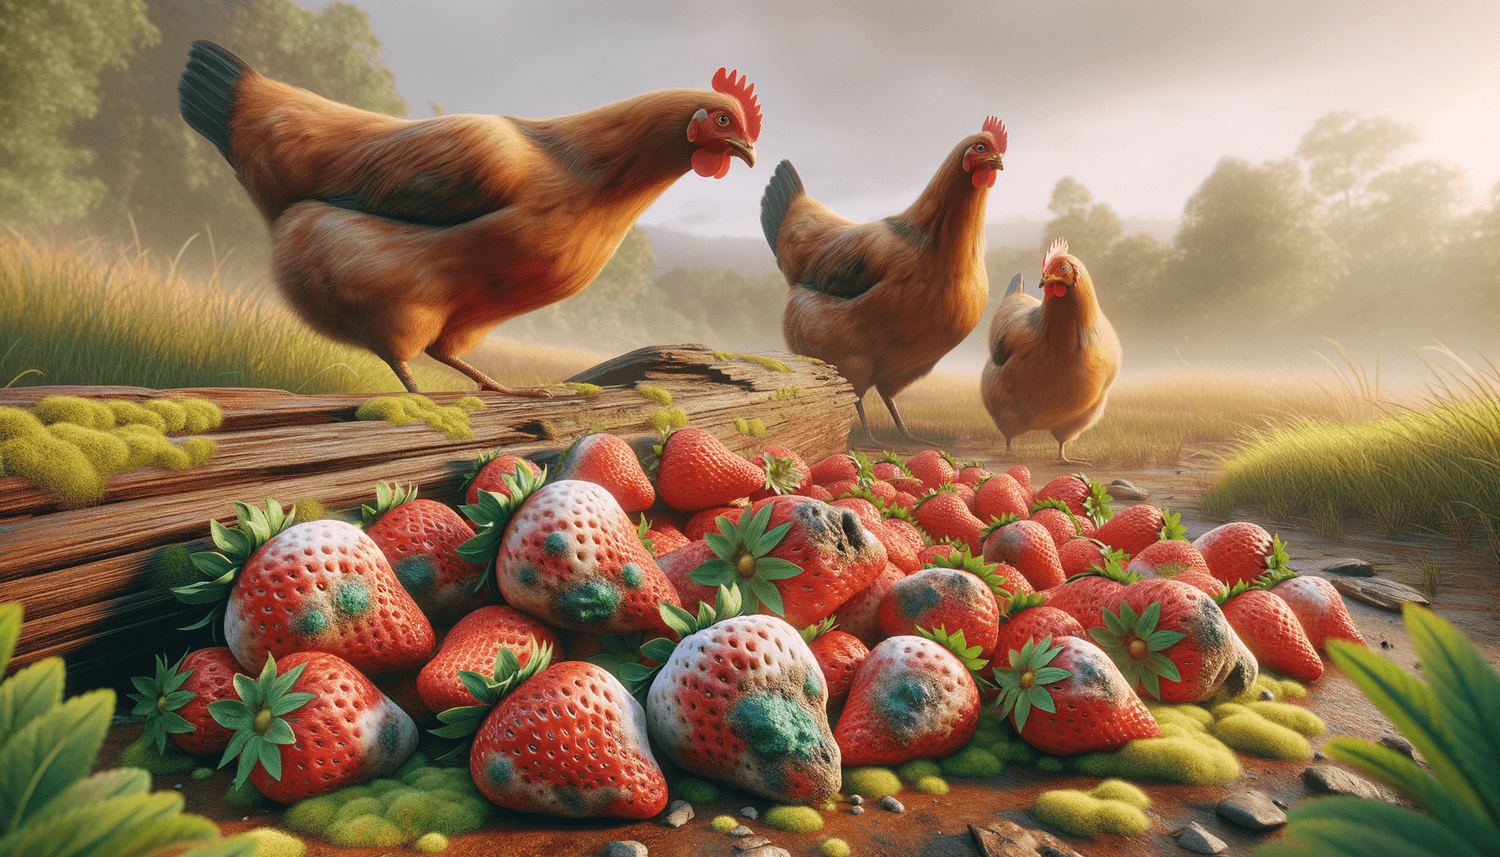 Can Chickens Eat Moldy Strawberries?